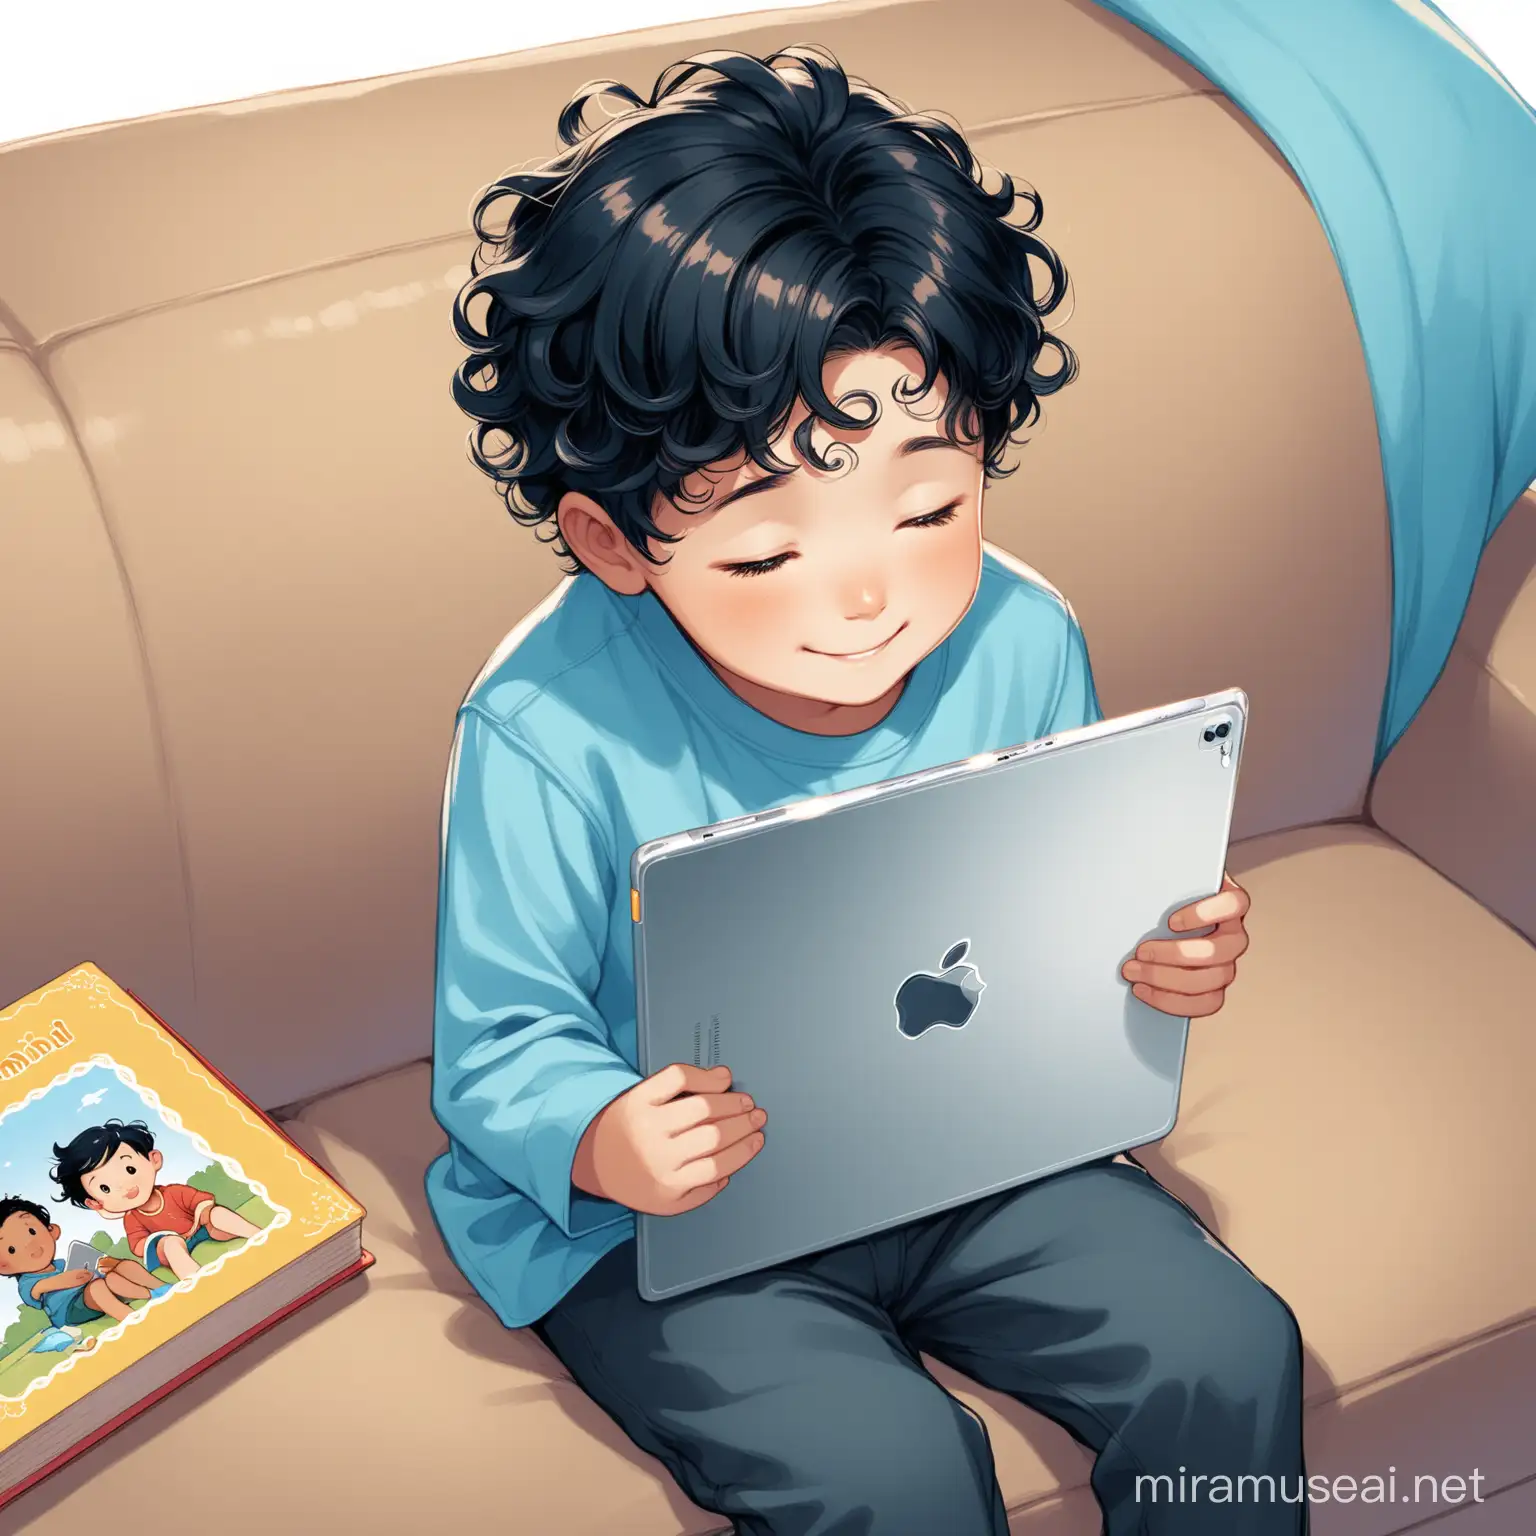 Curly Haired Boy Smiling with iPad Childrens Illustration Style